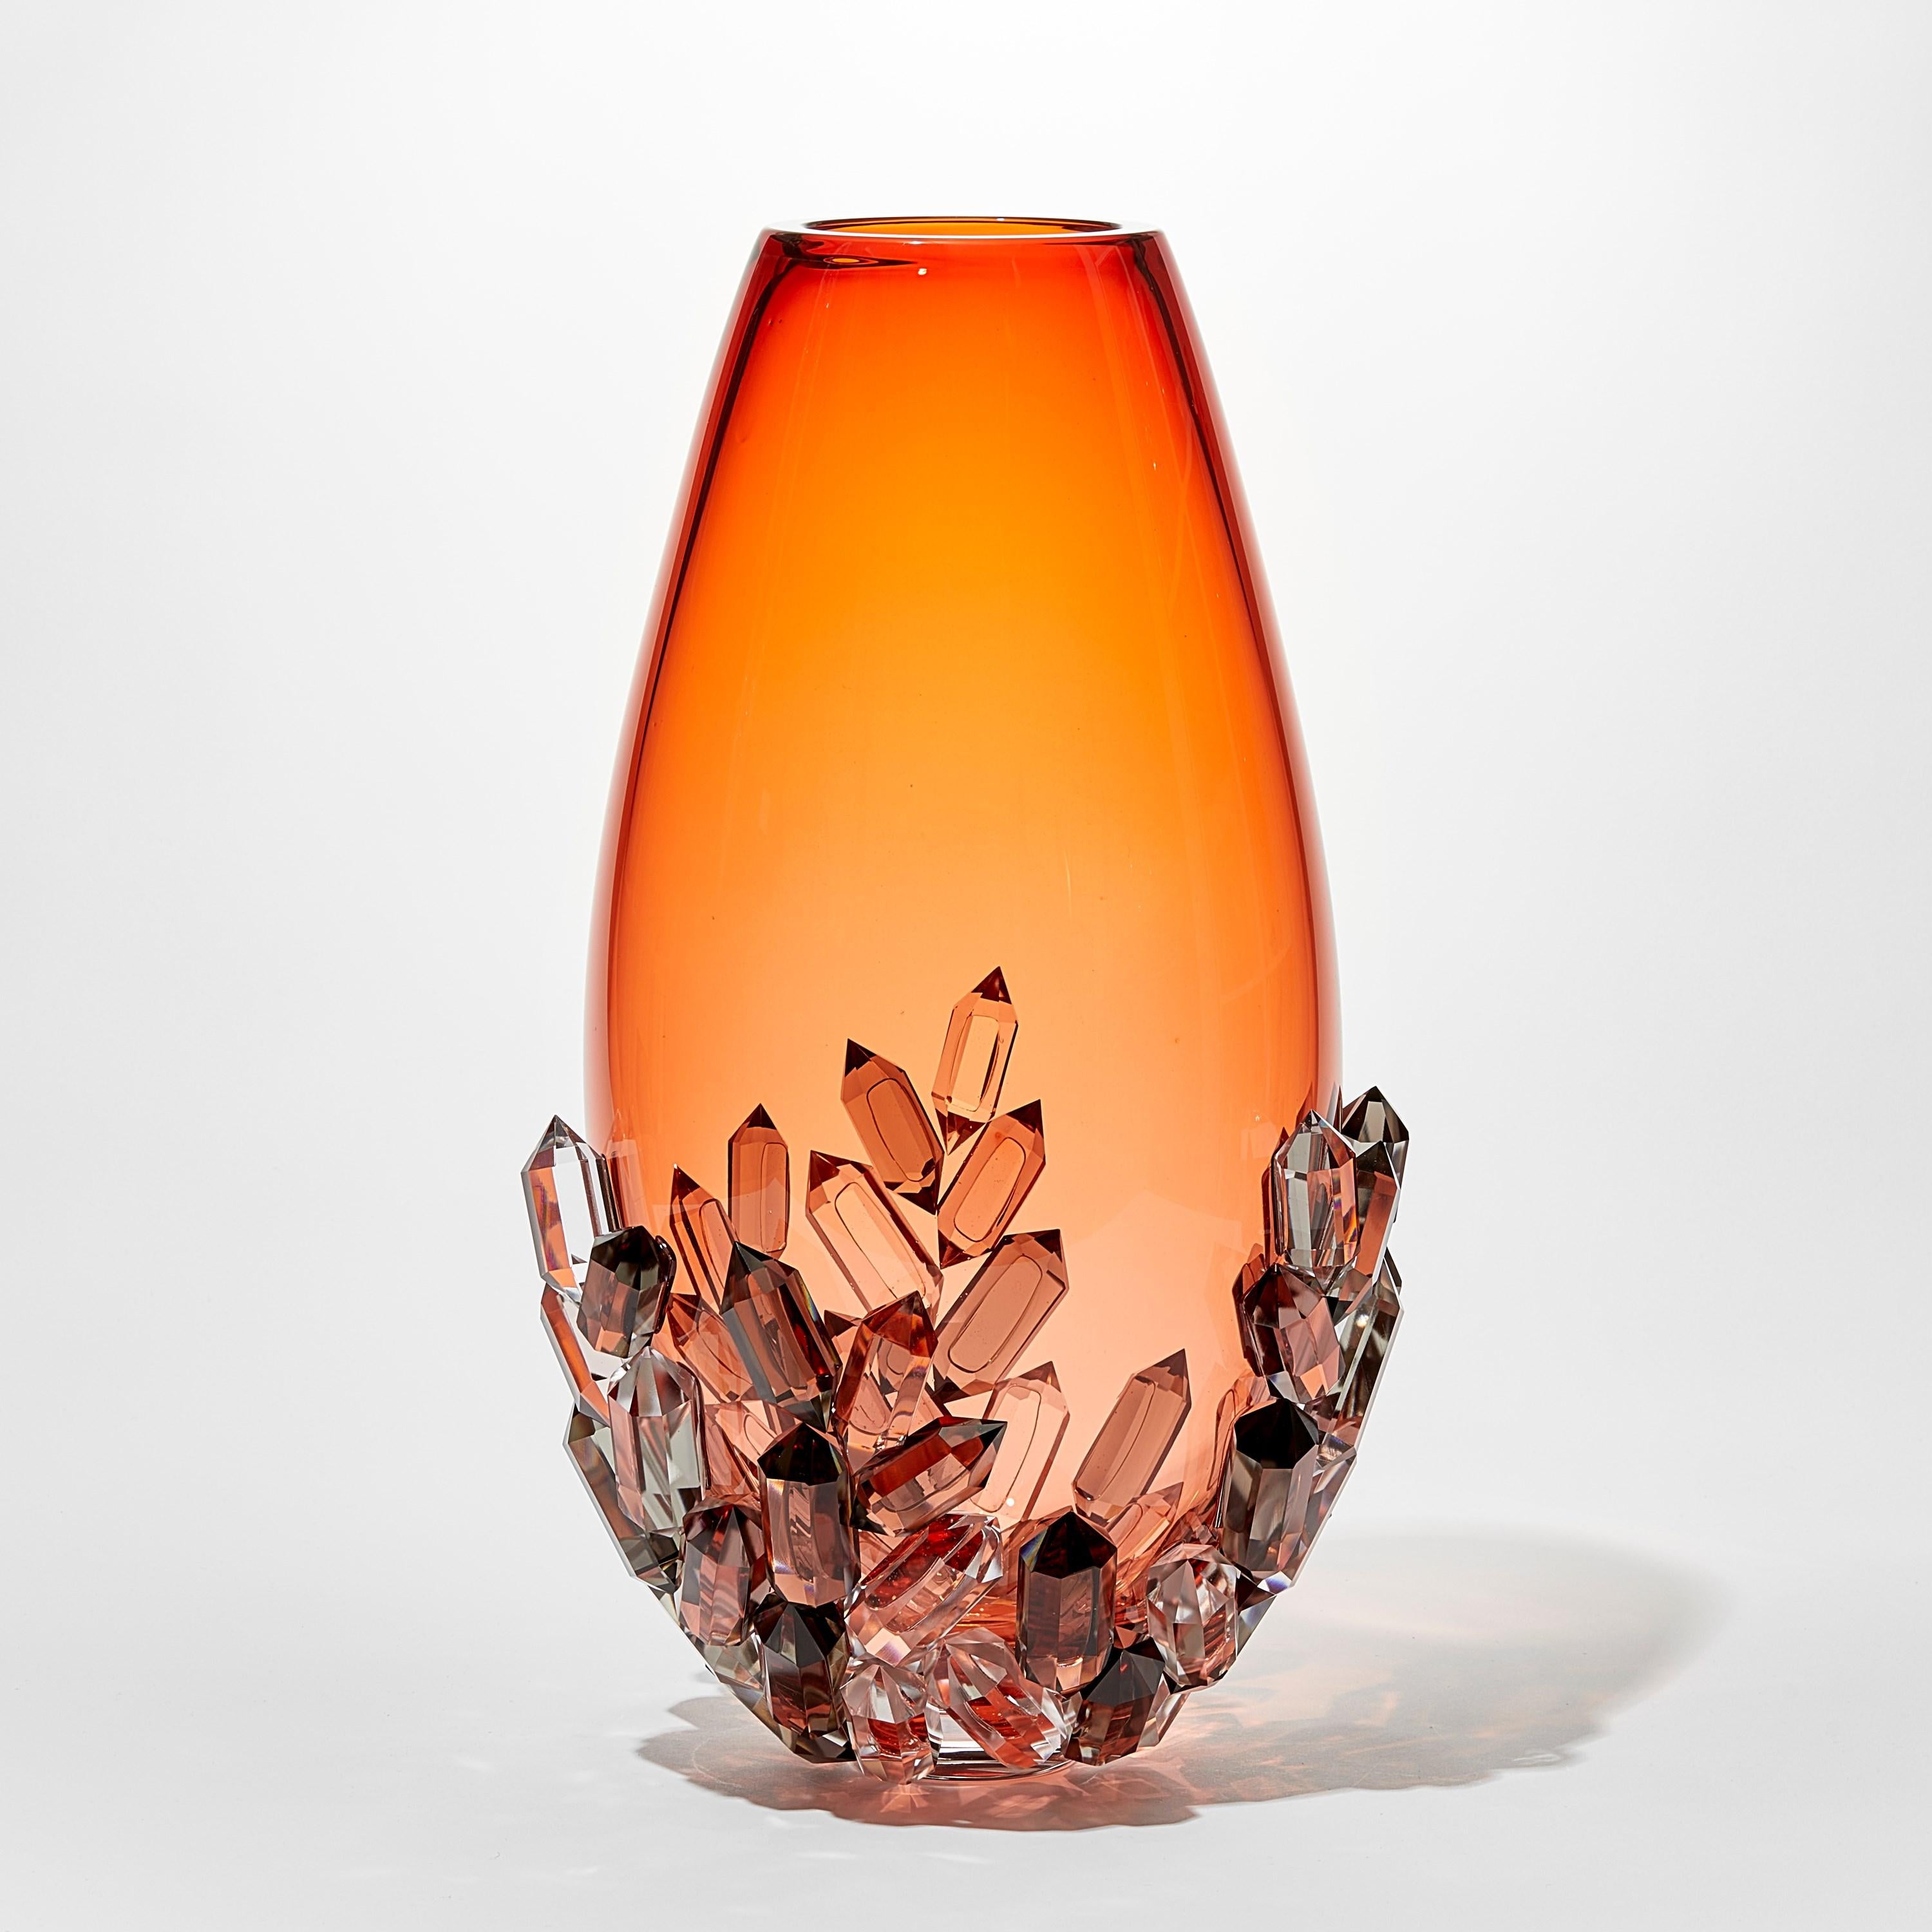 British Cristallized Aurora, a peach glass vase with cut crystals by Hanne Enemark For Sale